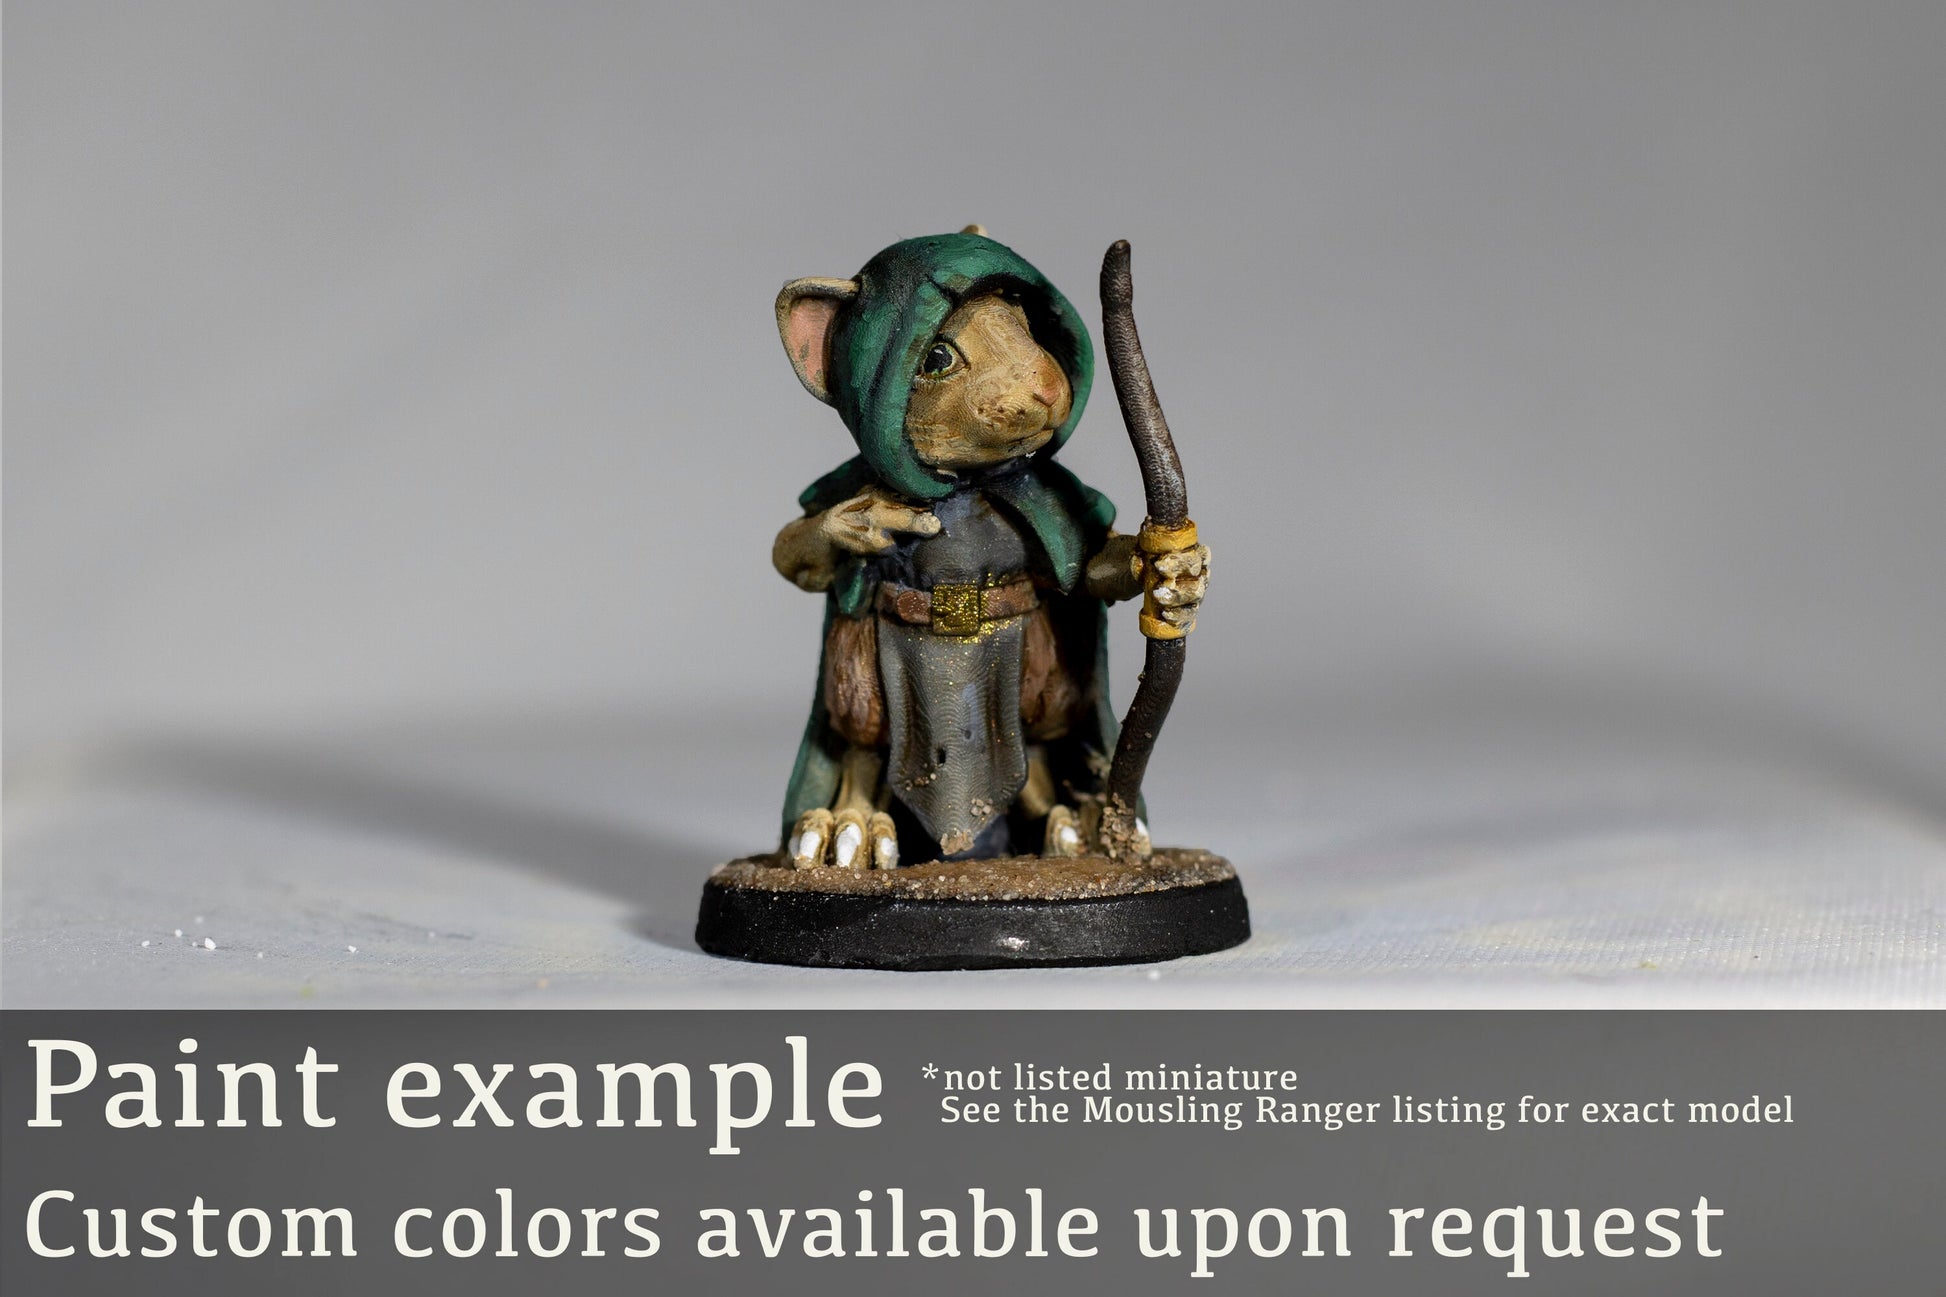 Goblins with Bow - 3 Duncan Shadow Printed Miniature | Dungeons & Dragons | Pathfinder | Tabletop